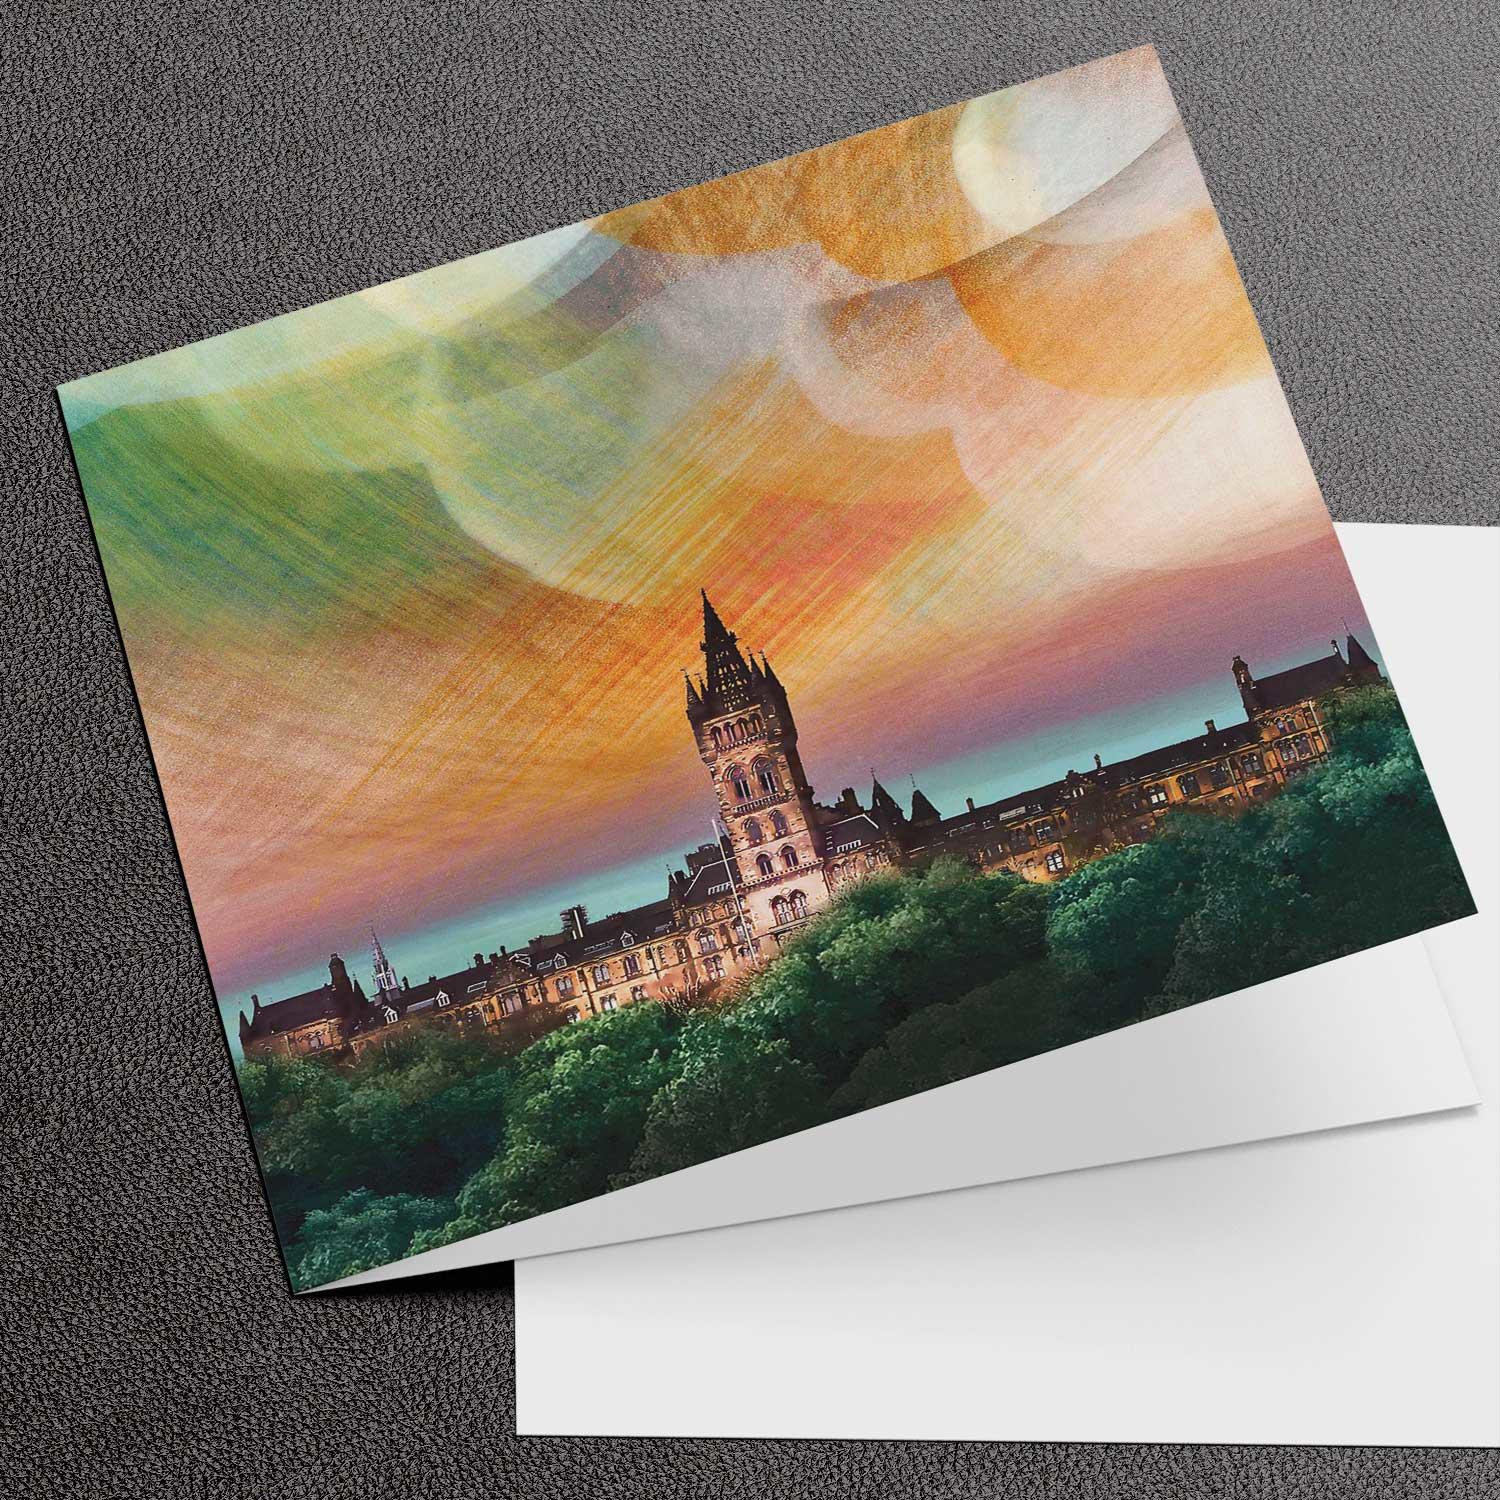 Glasgow University, Glasgow Greeting Card from an original painting by artist Esther Cohen